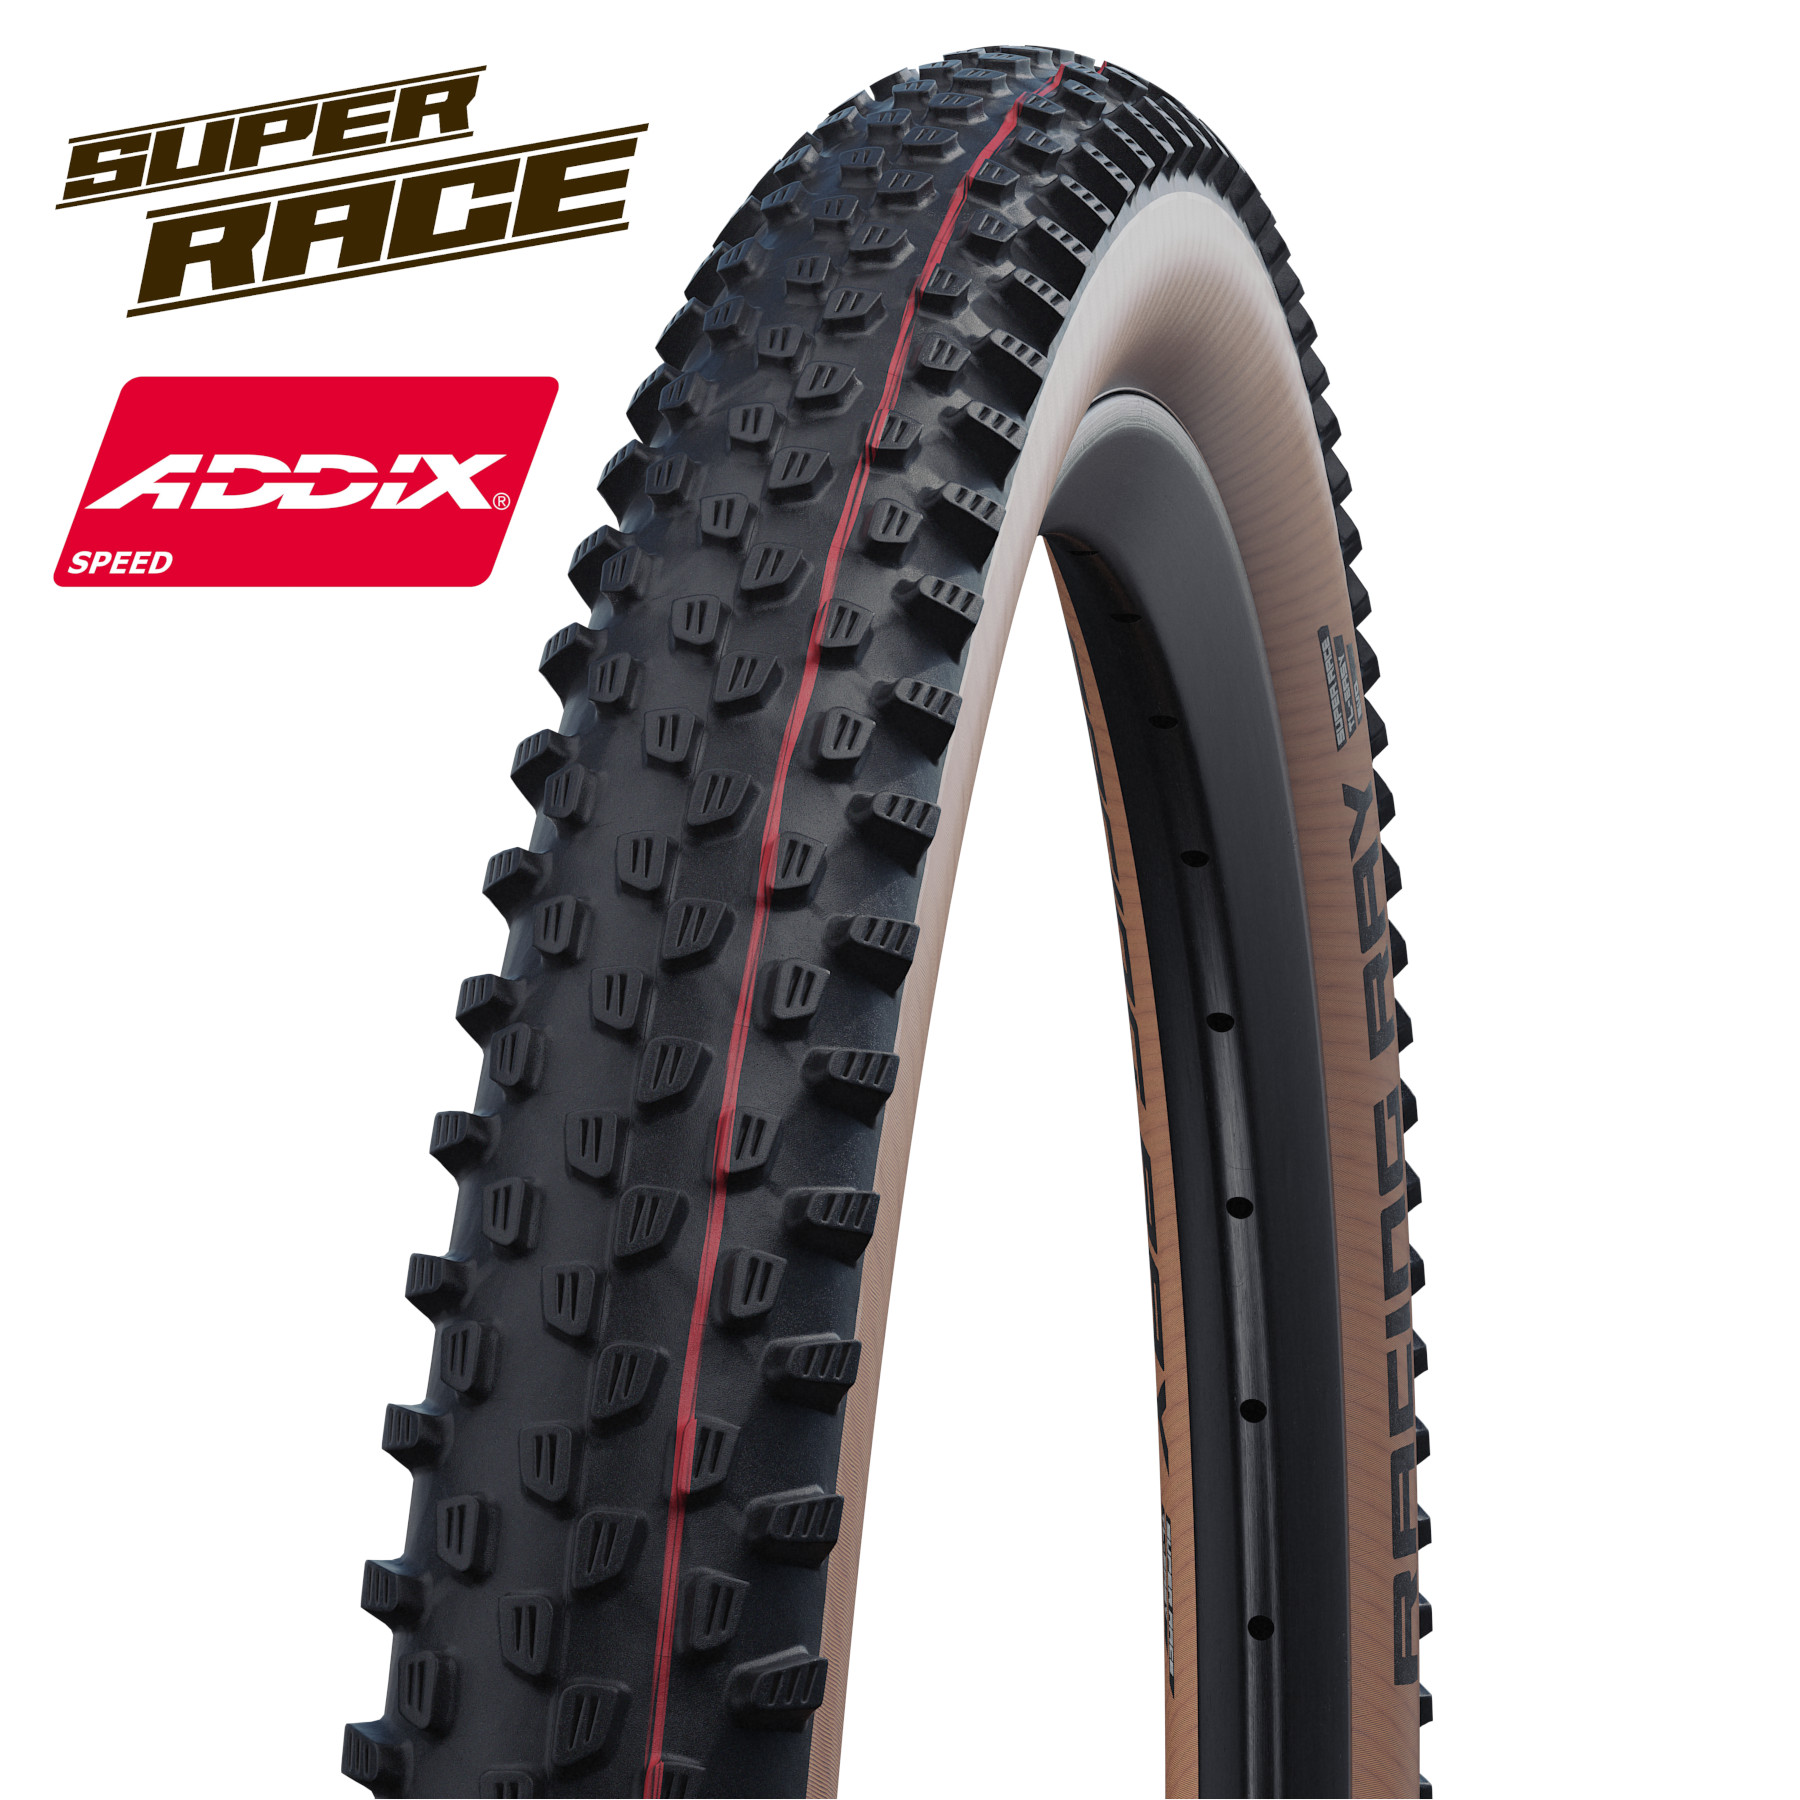 Picture of Schwalbe Racing Ray Evolution MTB Folding Tire - AddixSpeed - SuperRace - TLEasy - 29x2.35 Inches - Transparent-Skin